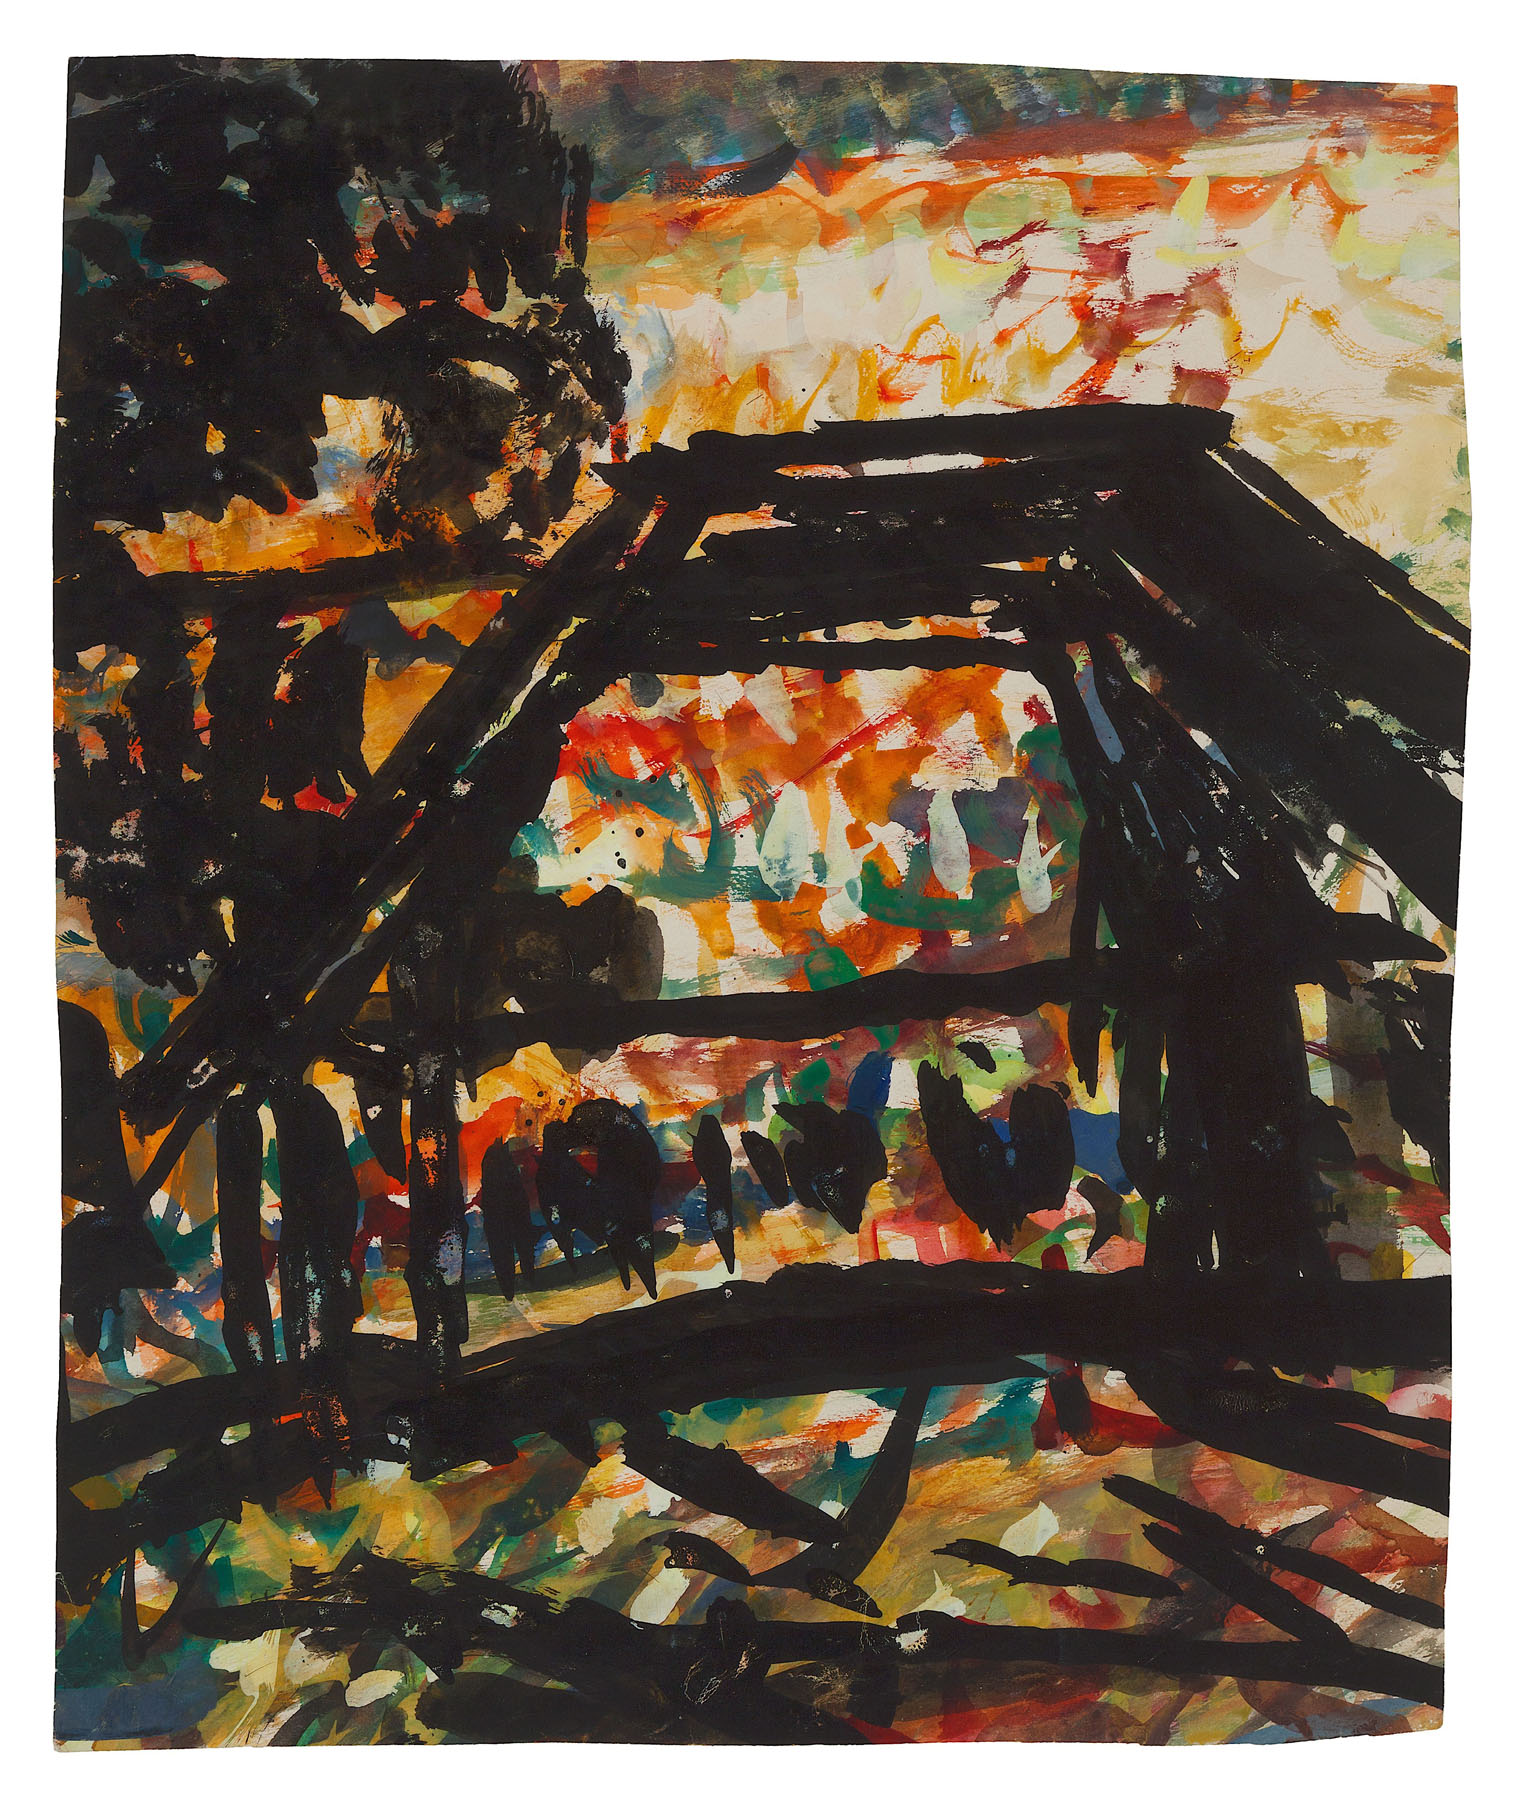 Forest Museum Grunewald, c. 1957. Black ink, gouache and watercolour on paper, 15.7 x 13.4 in. (40 x 34 cm). Private collection. Photo Malcolm Varon ©Bianca Stock